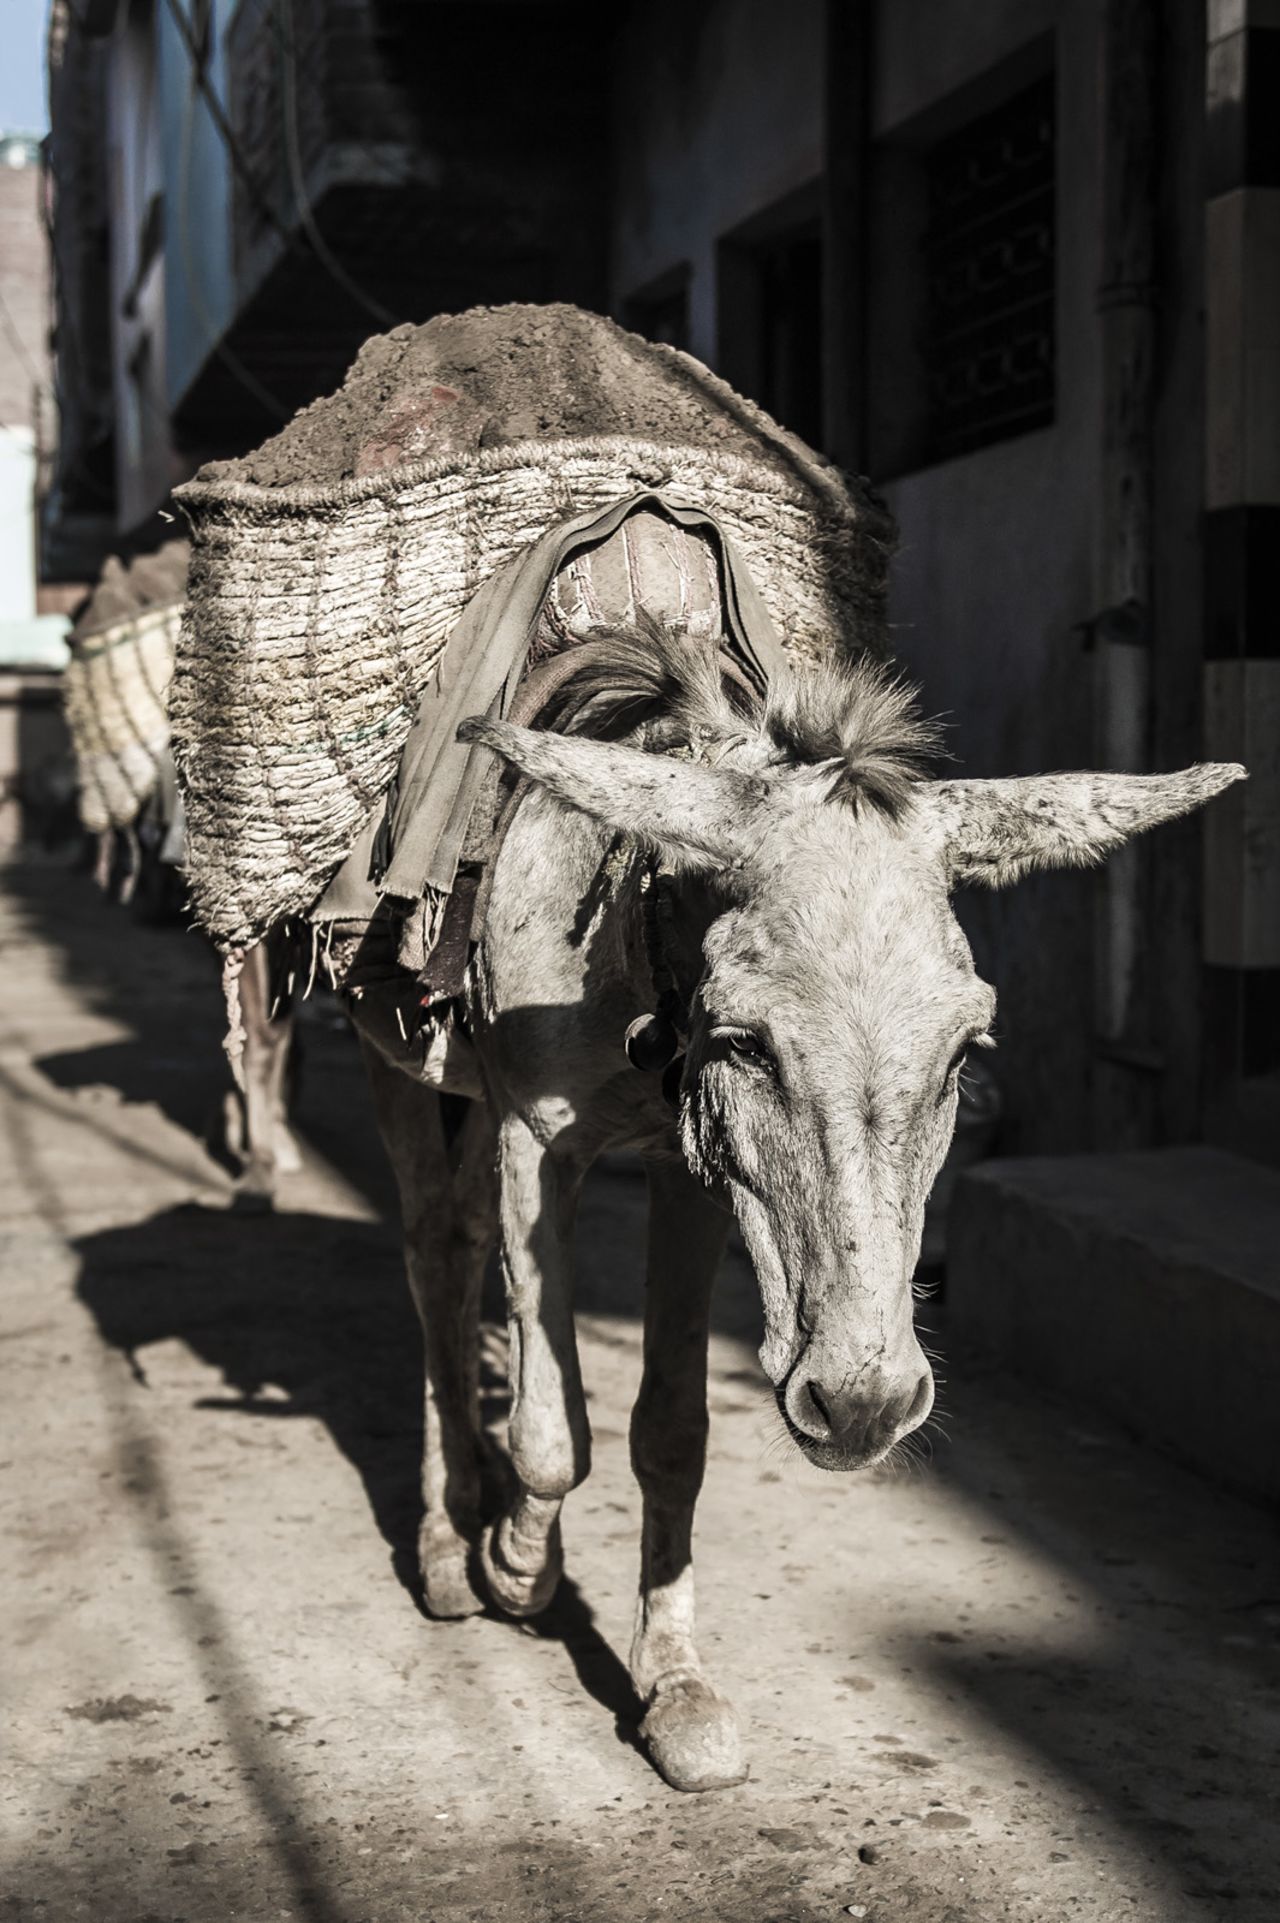 A tired working donkey carrying construction materials in a slum in Delhi, India.